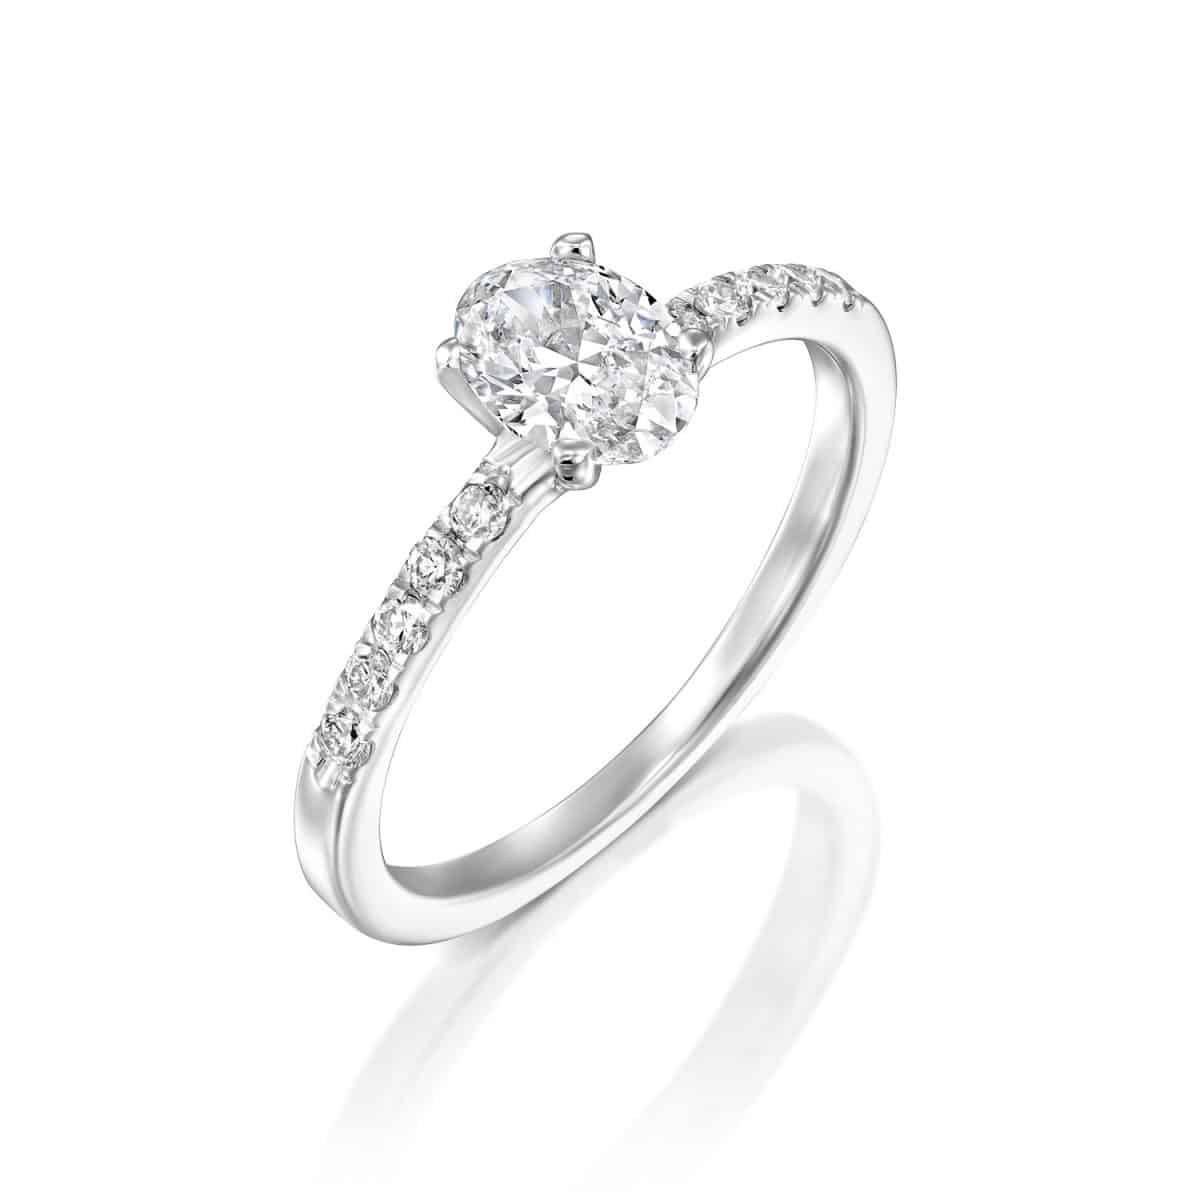 Oval - White Gold Lab Grown Diamond Engagement Ring 0.61ct. - main